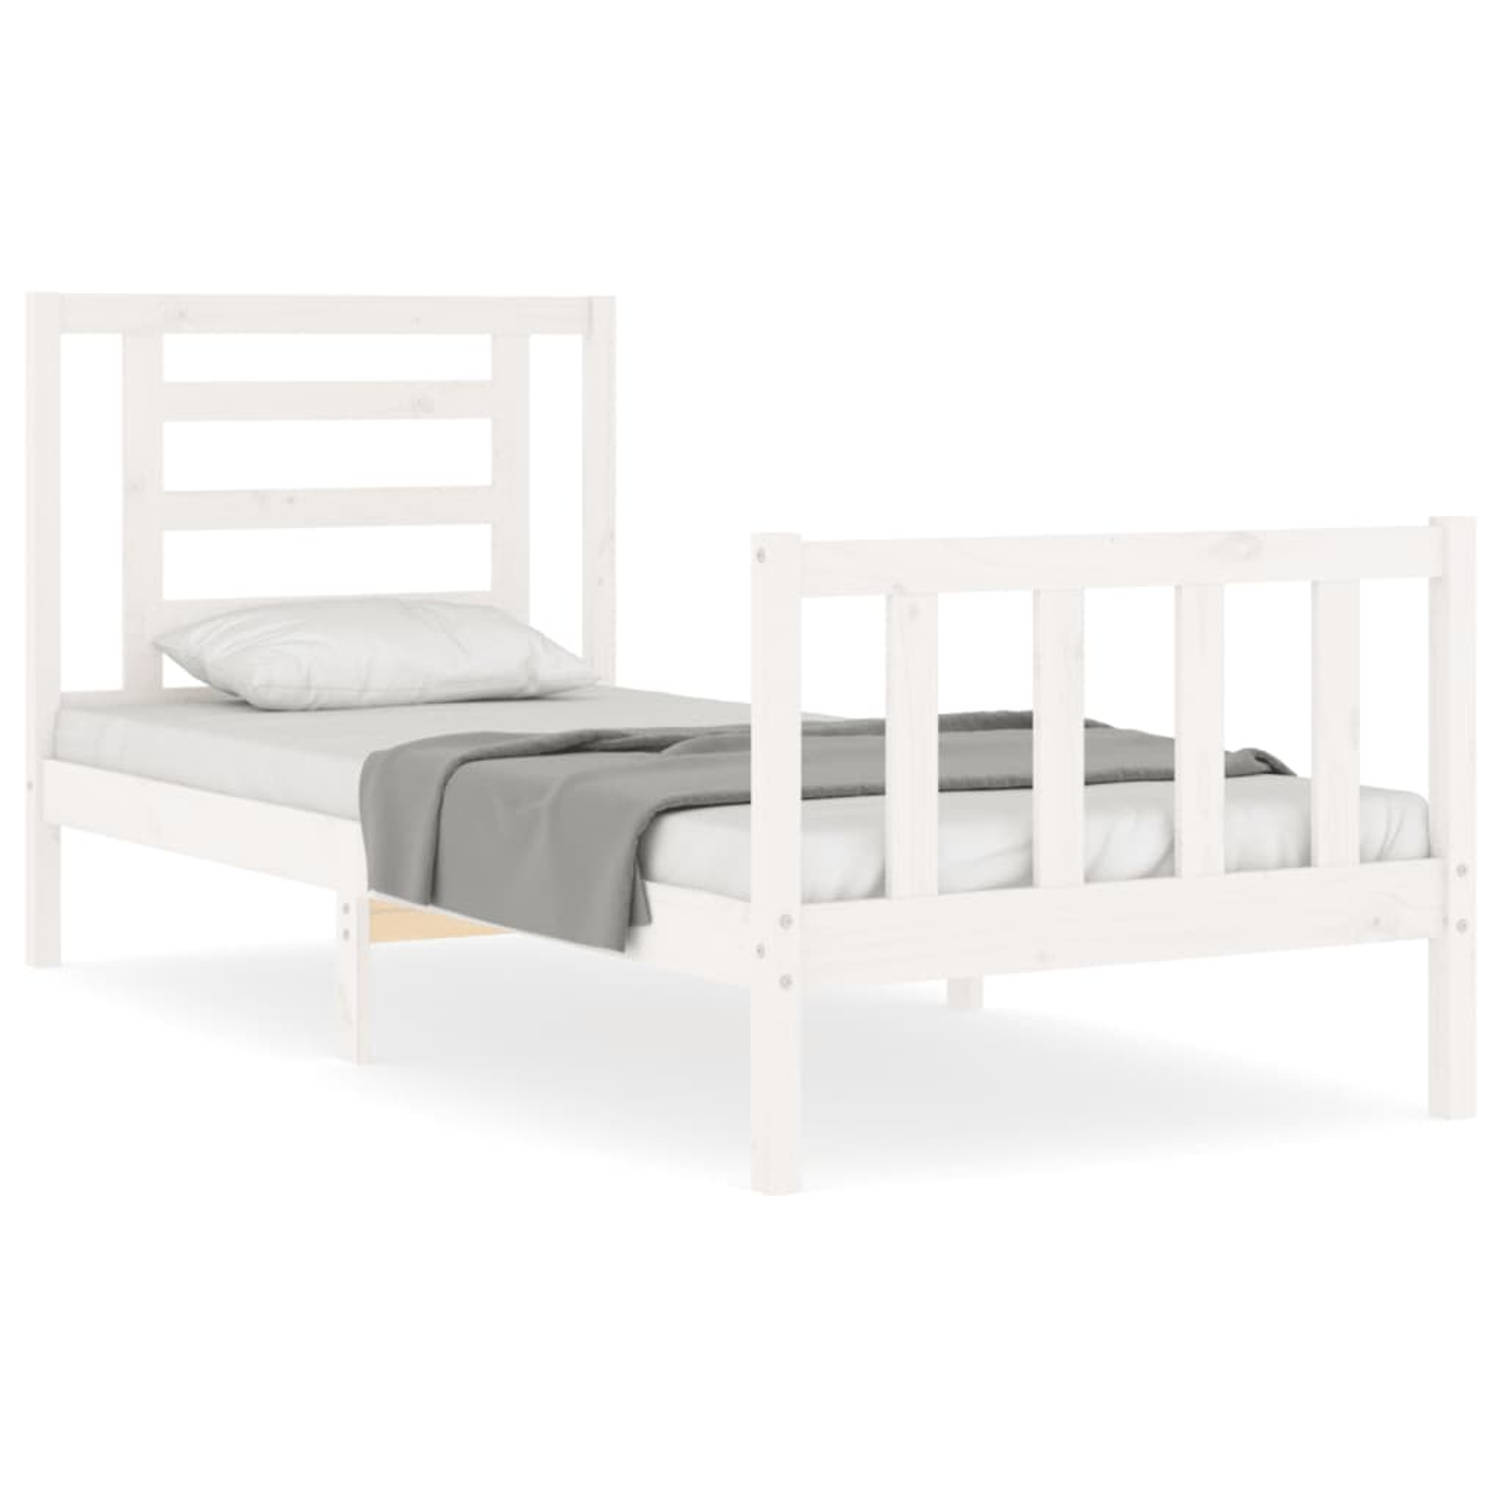 The Living Store Bed - Massief grenenhout - 195.5 x 95.5 x 100 cm - Wit